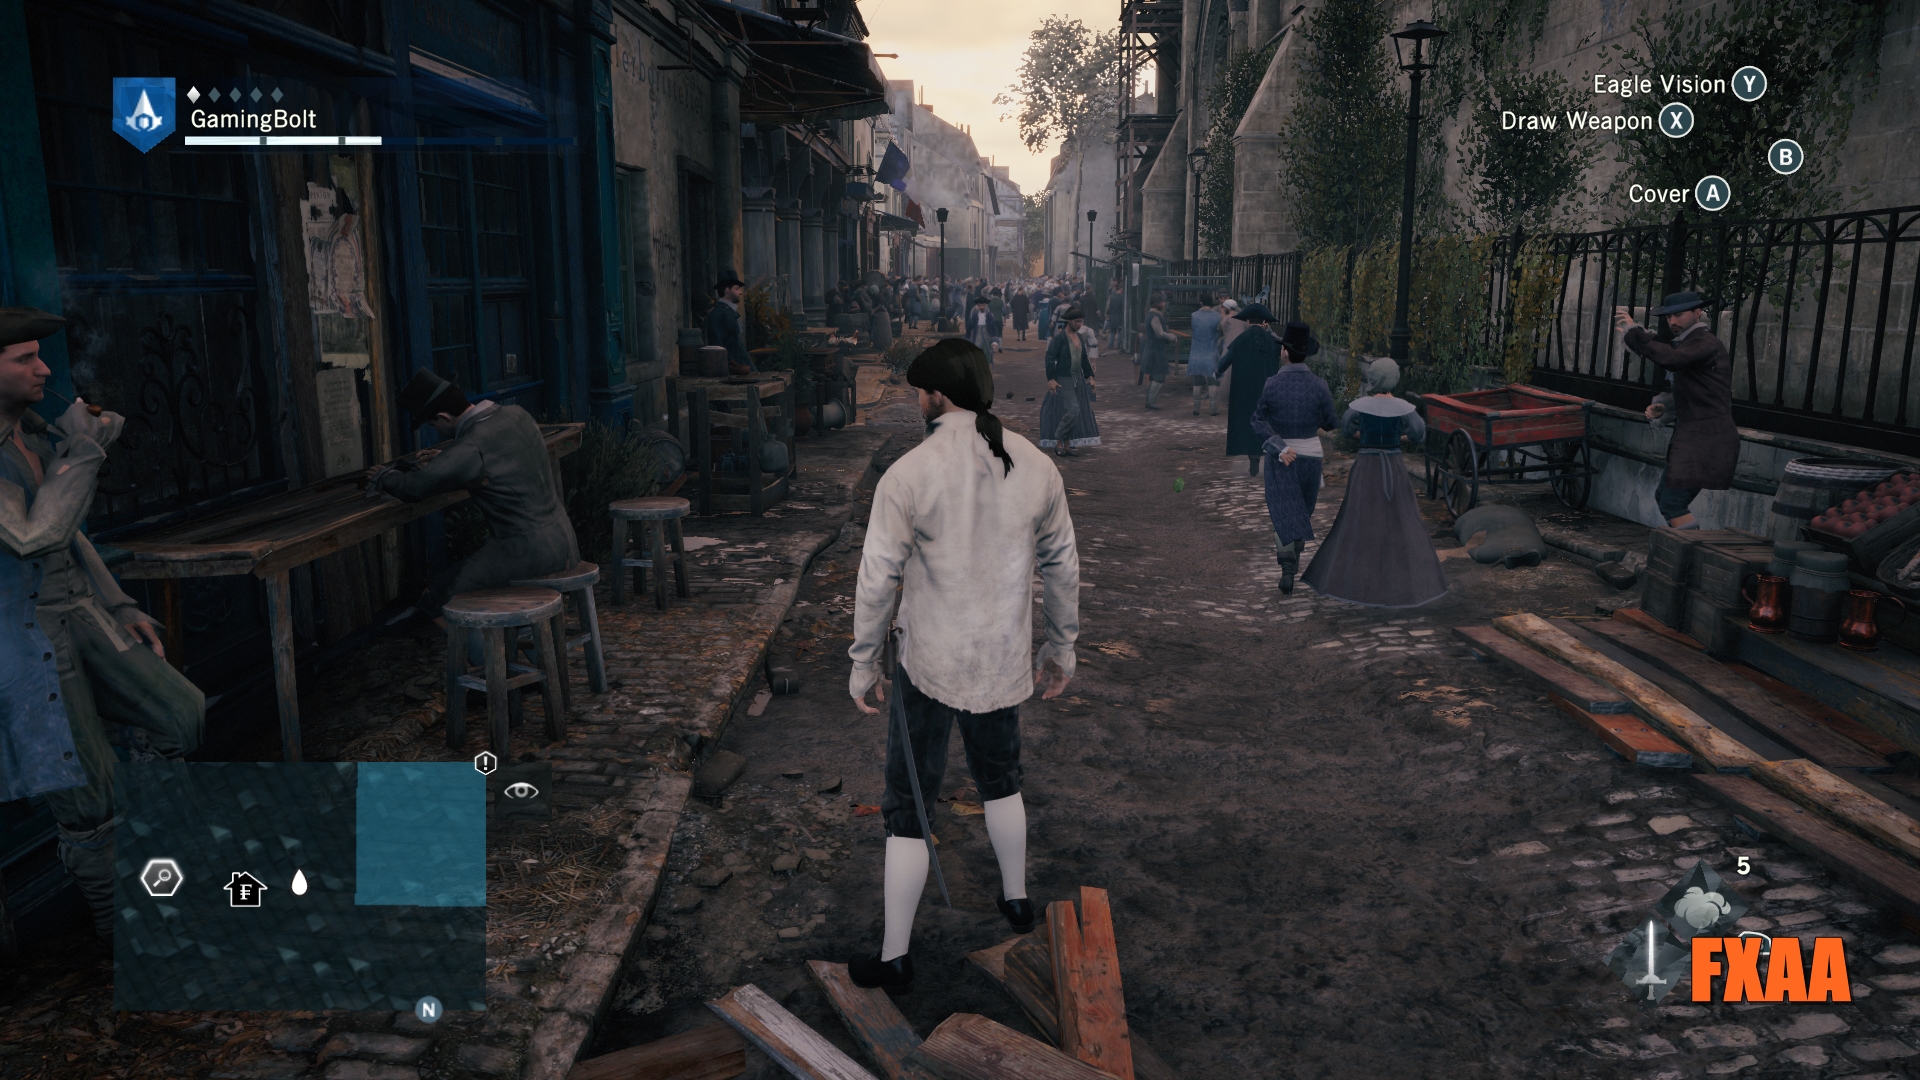 game assasin creed unity